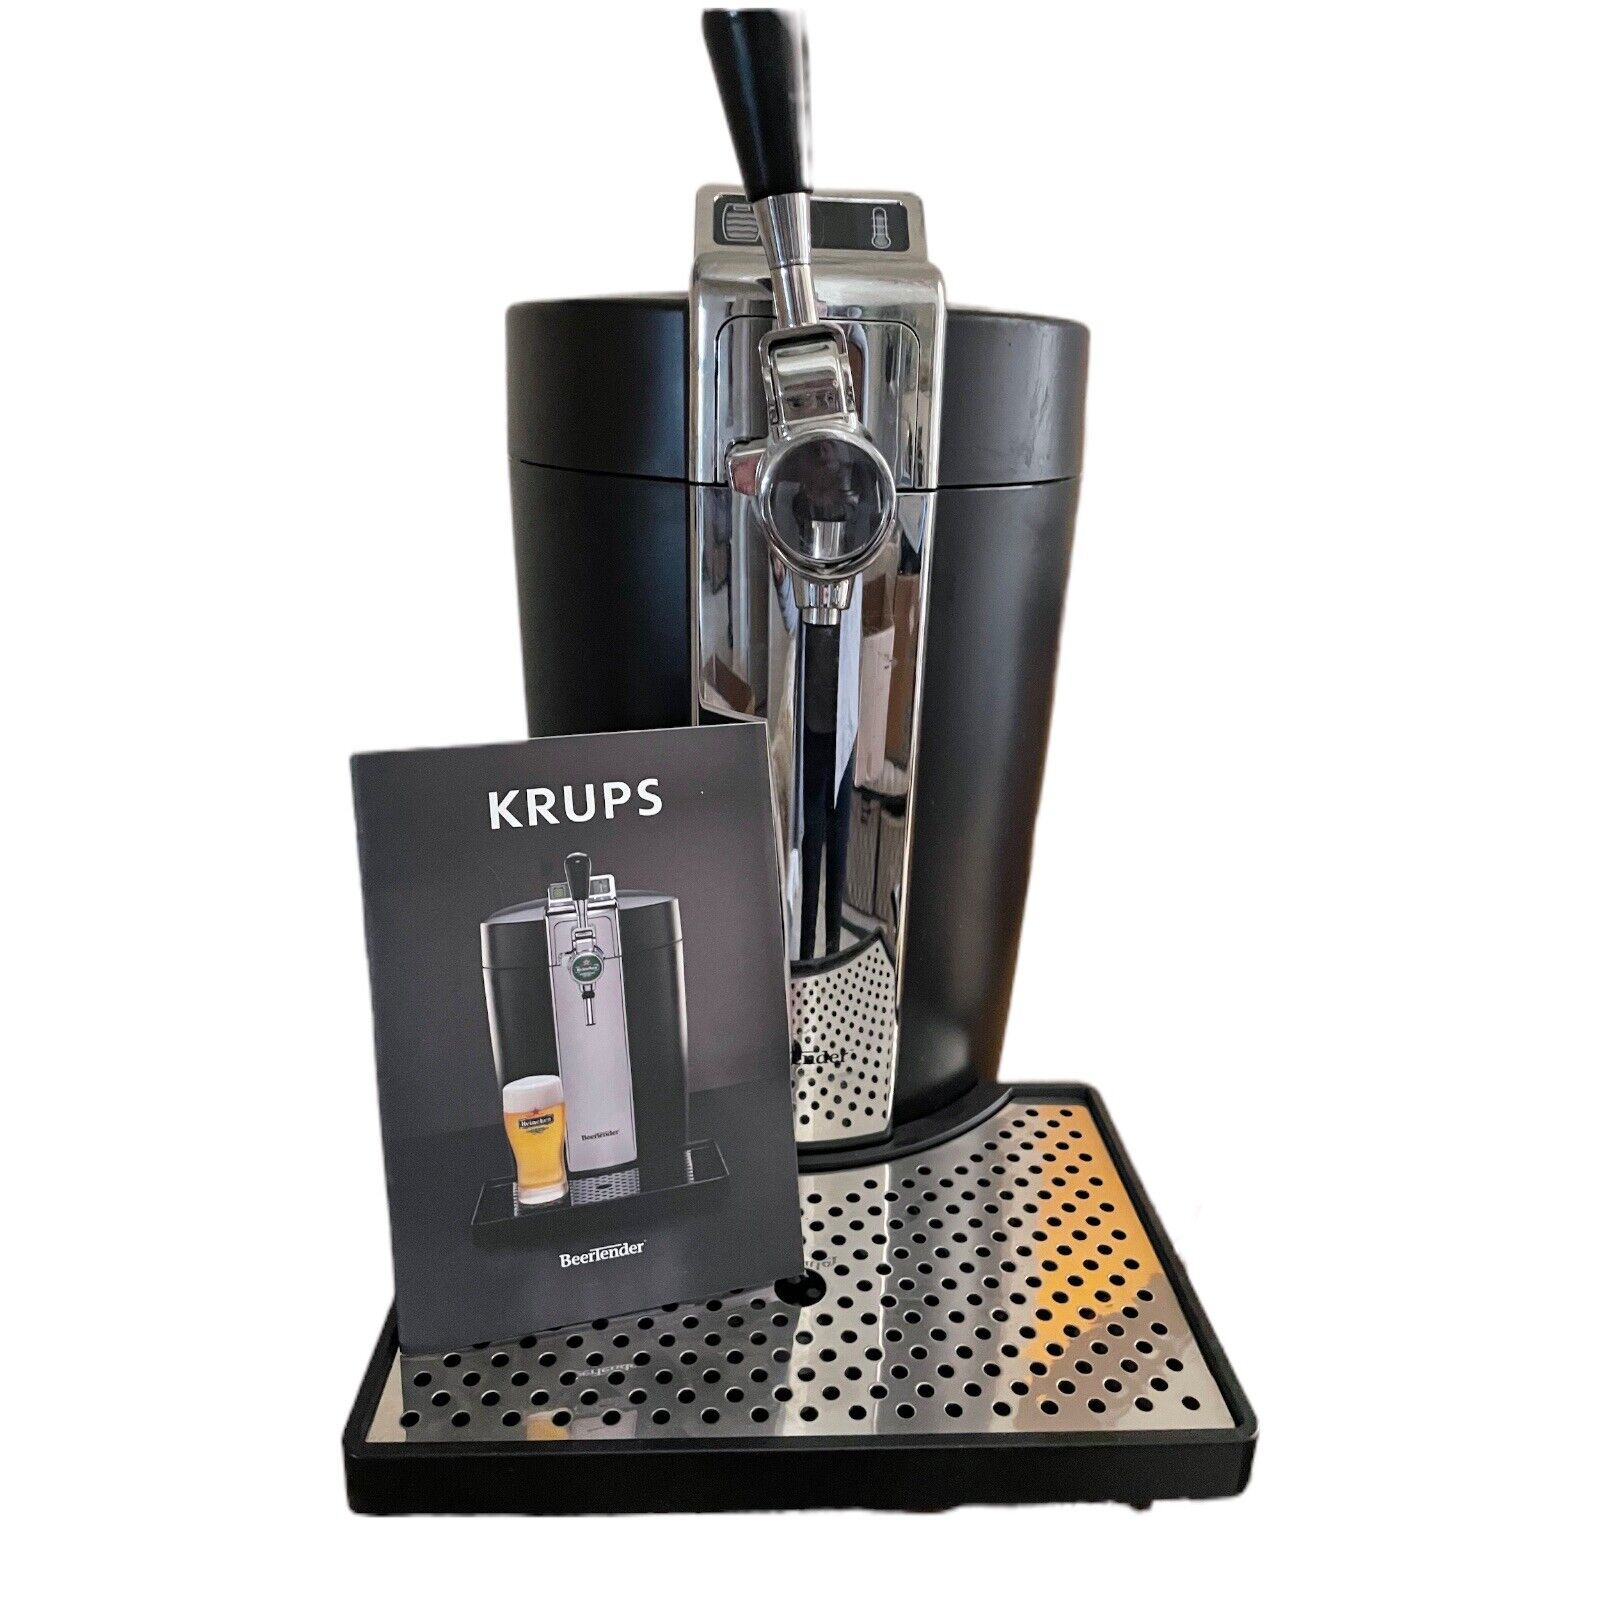 What To Do With Old Krups Kegerator